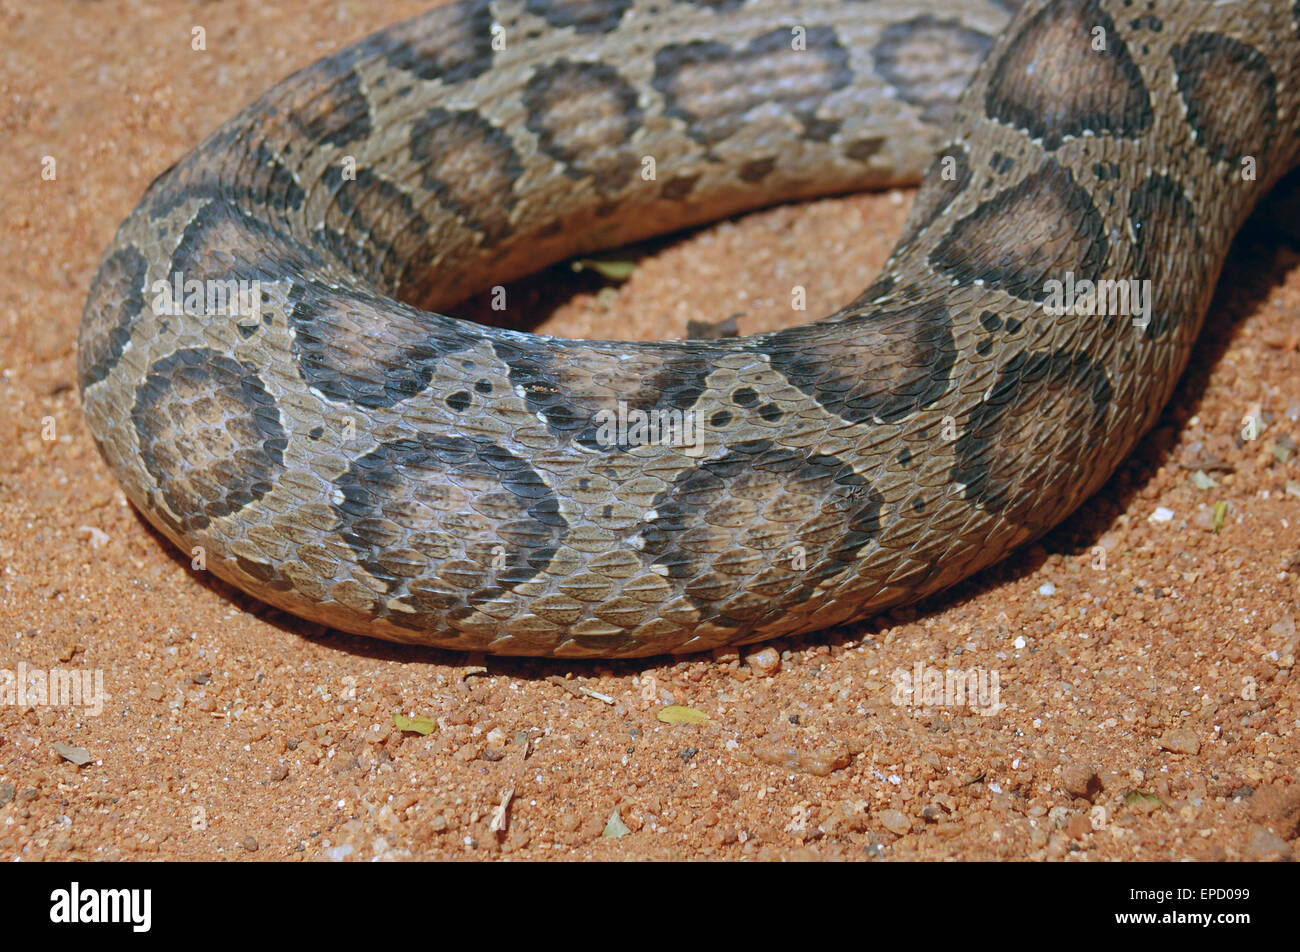 Camouflage Pattern On Adult Russell S Viper Daboia Russelii Tamil Nadu South India Stock Photo Alamy